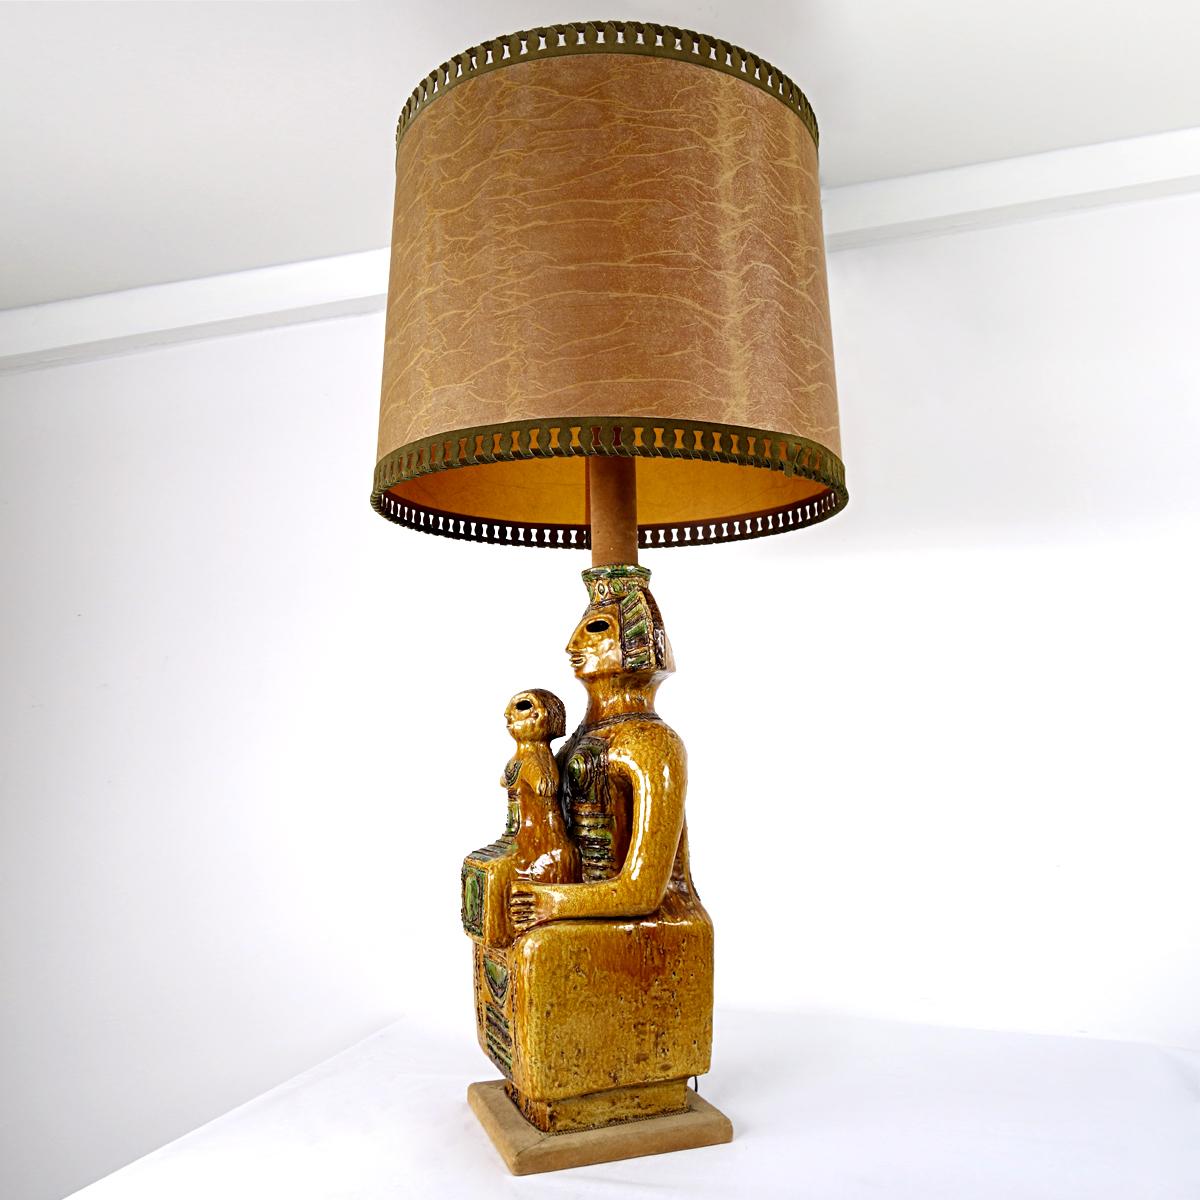 This eye catching floor or table lamp in Mayan style truly is an impressive piece.
Its foot is a large ceramic statue of a queen and her child, or a king if you will with his successor, in brown and green shades. 
The lower part of the 